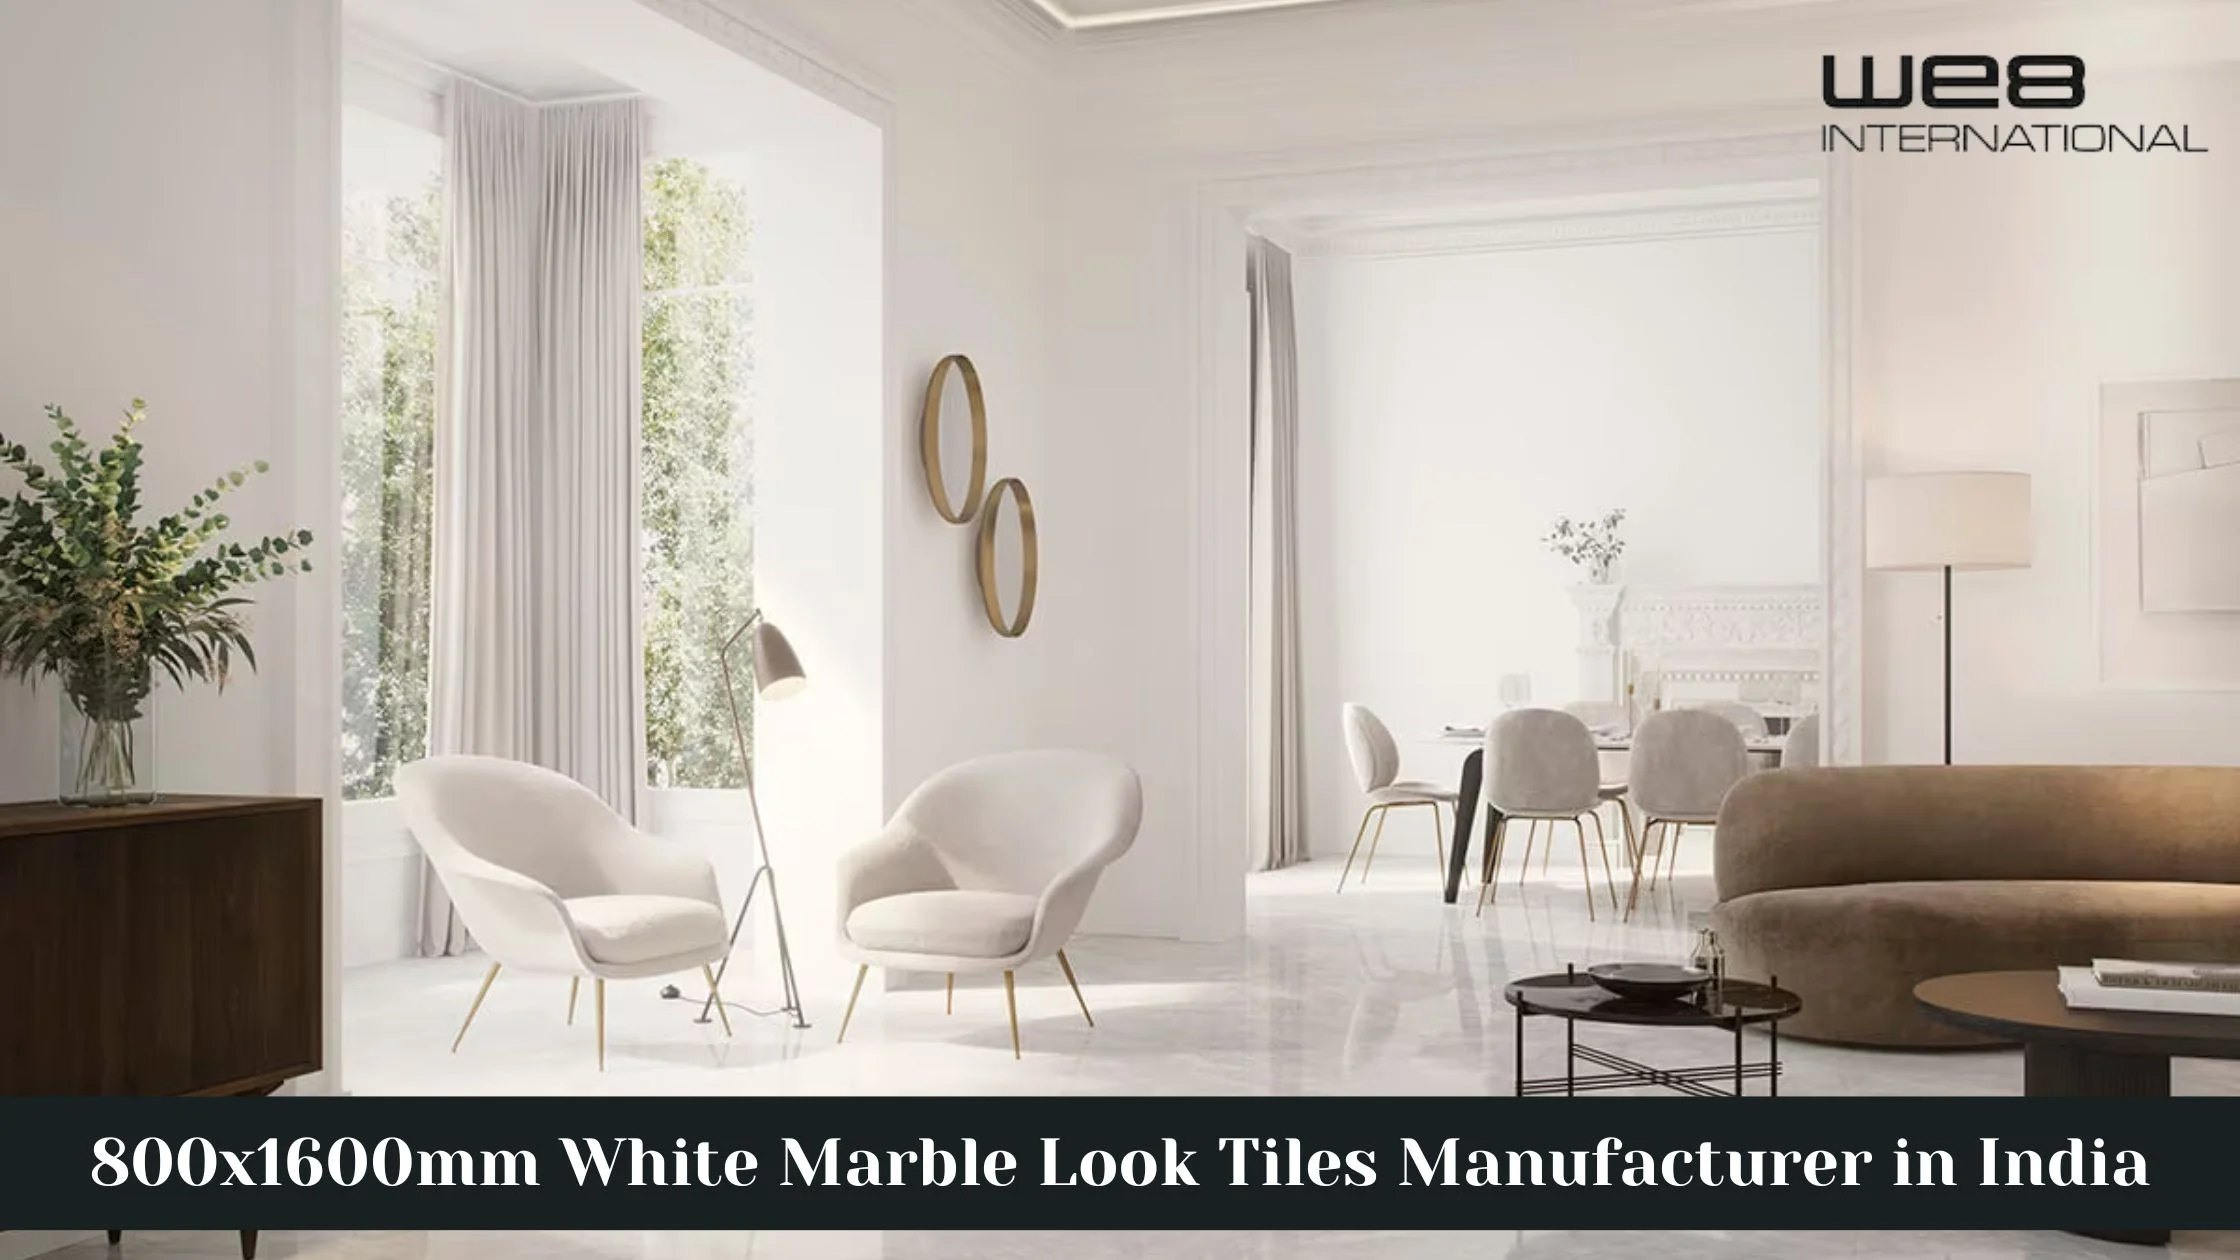 800x1600mm White Marble Look Tiles Manufacturer in India